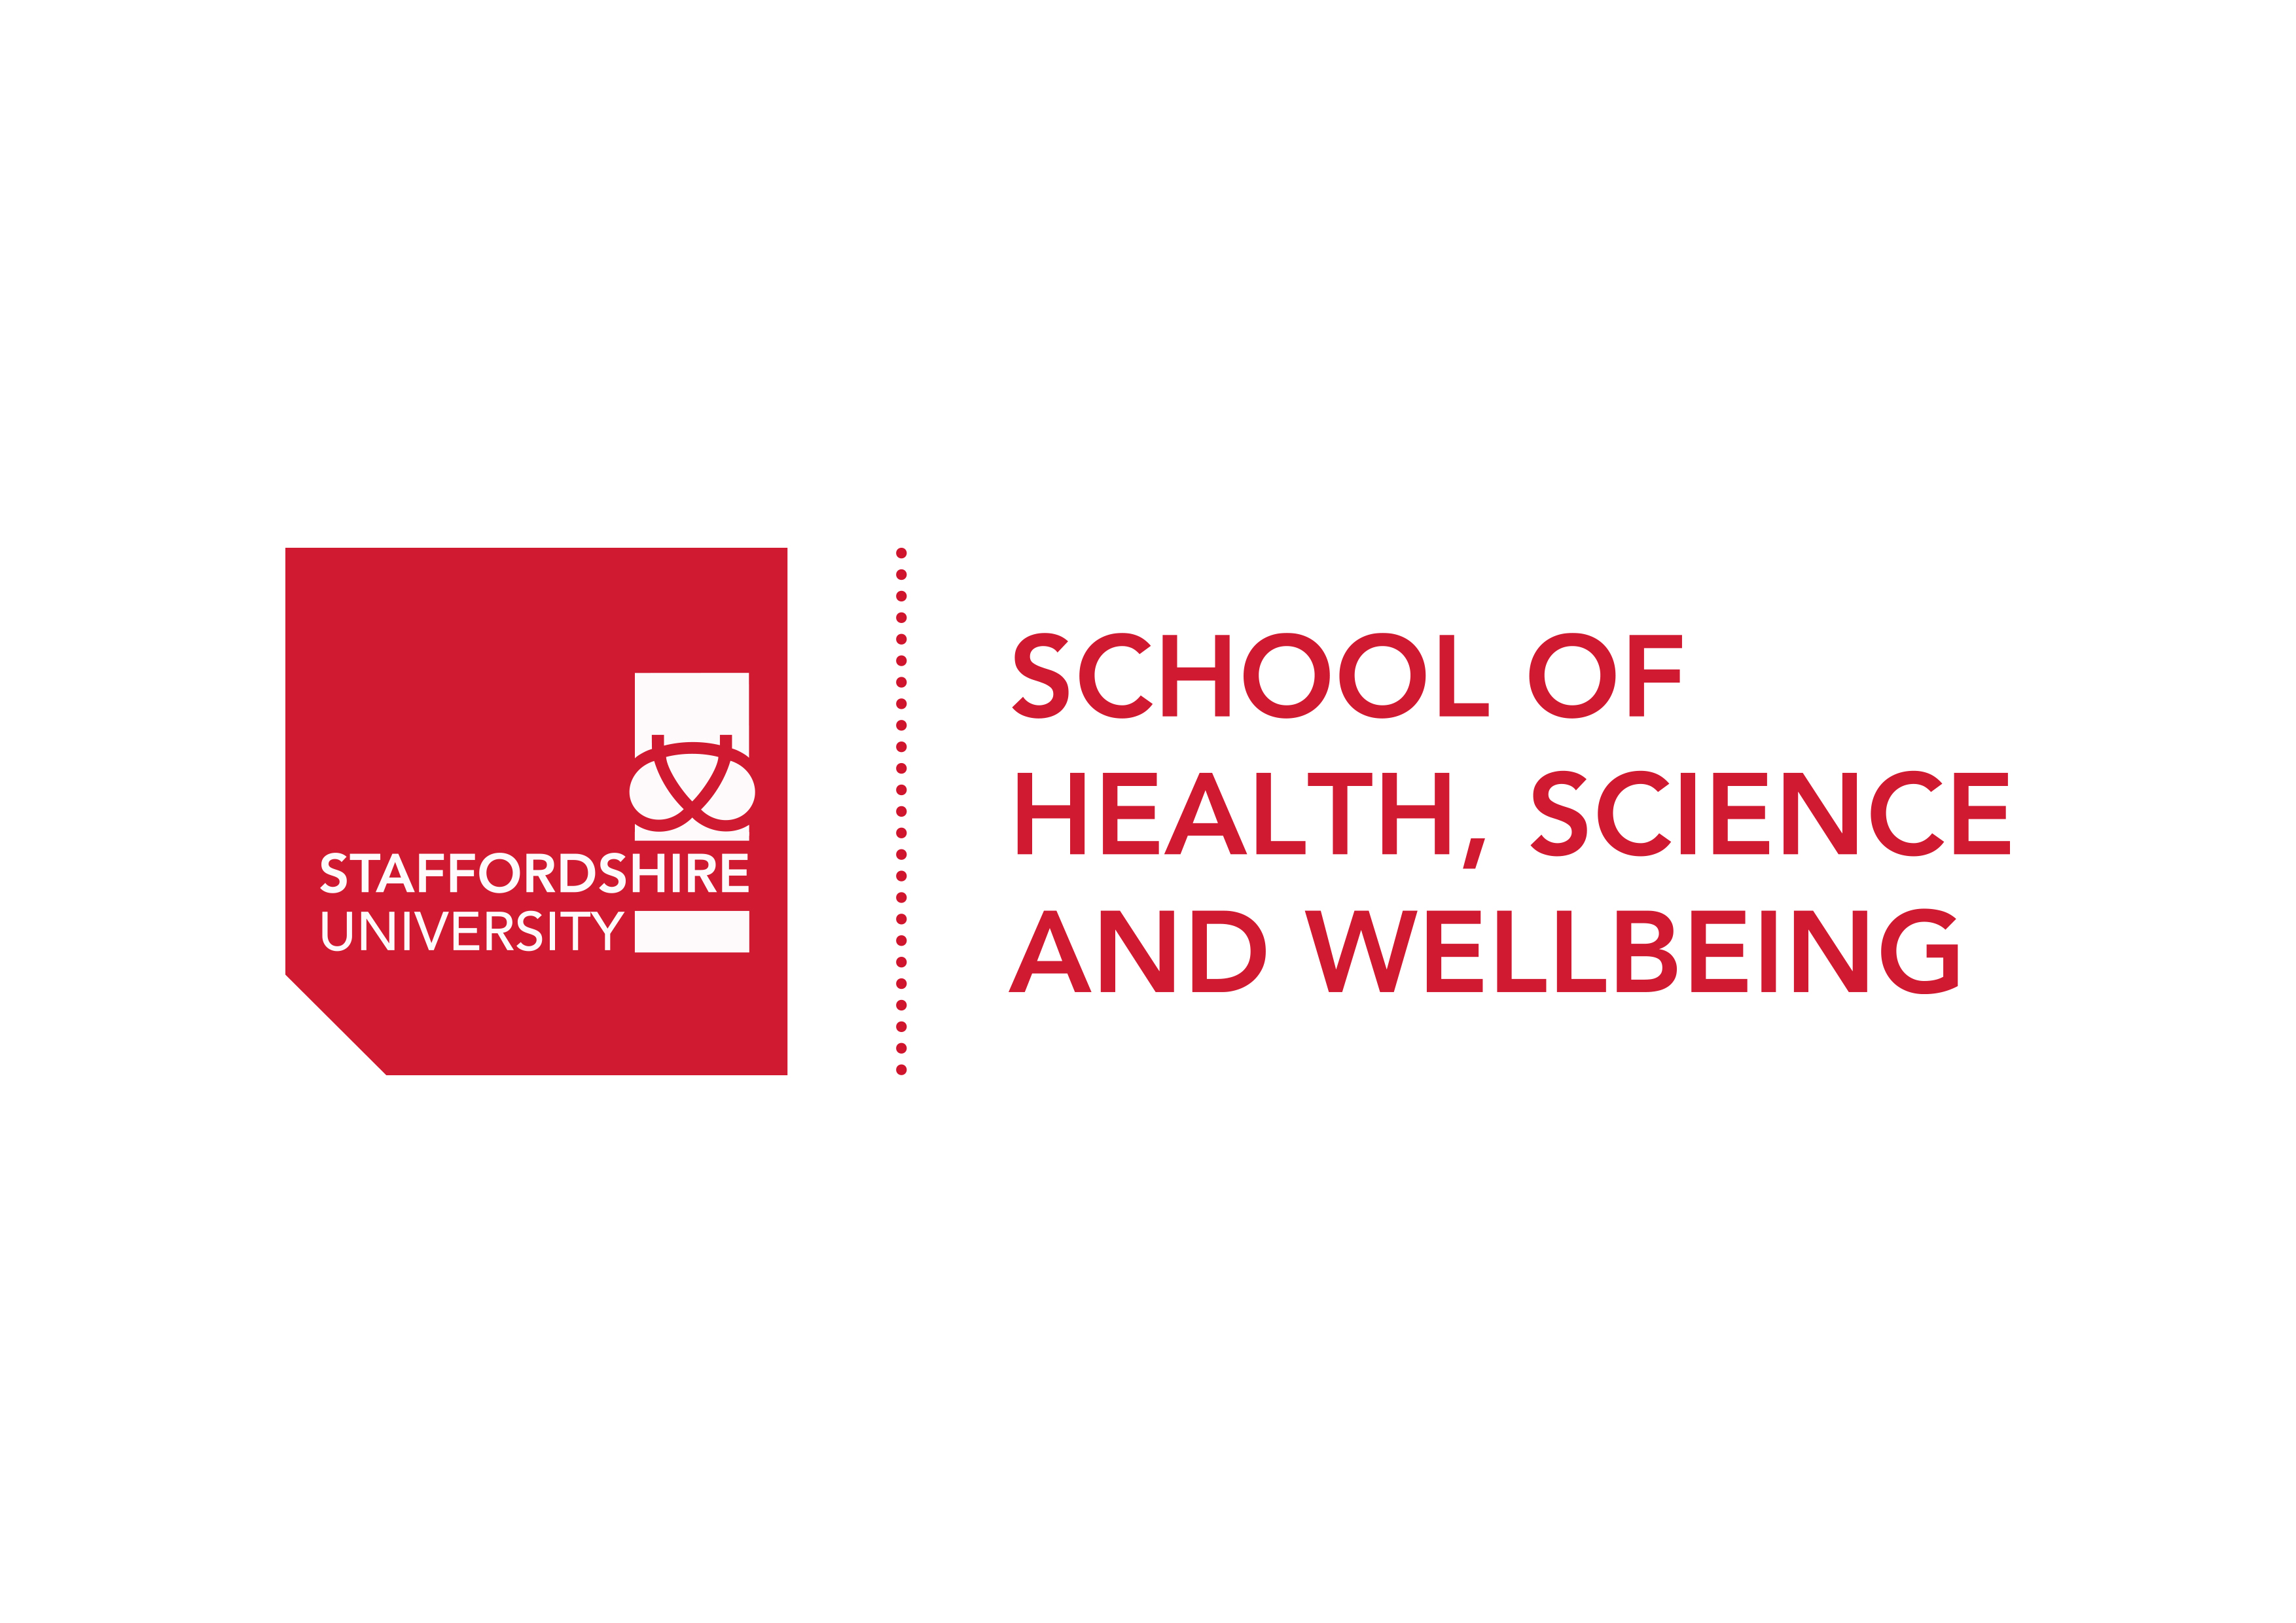 Staffordshire University, School of Health, Science and Wellbeing